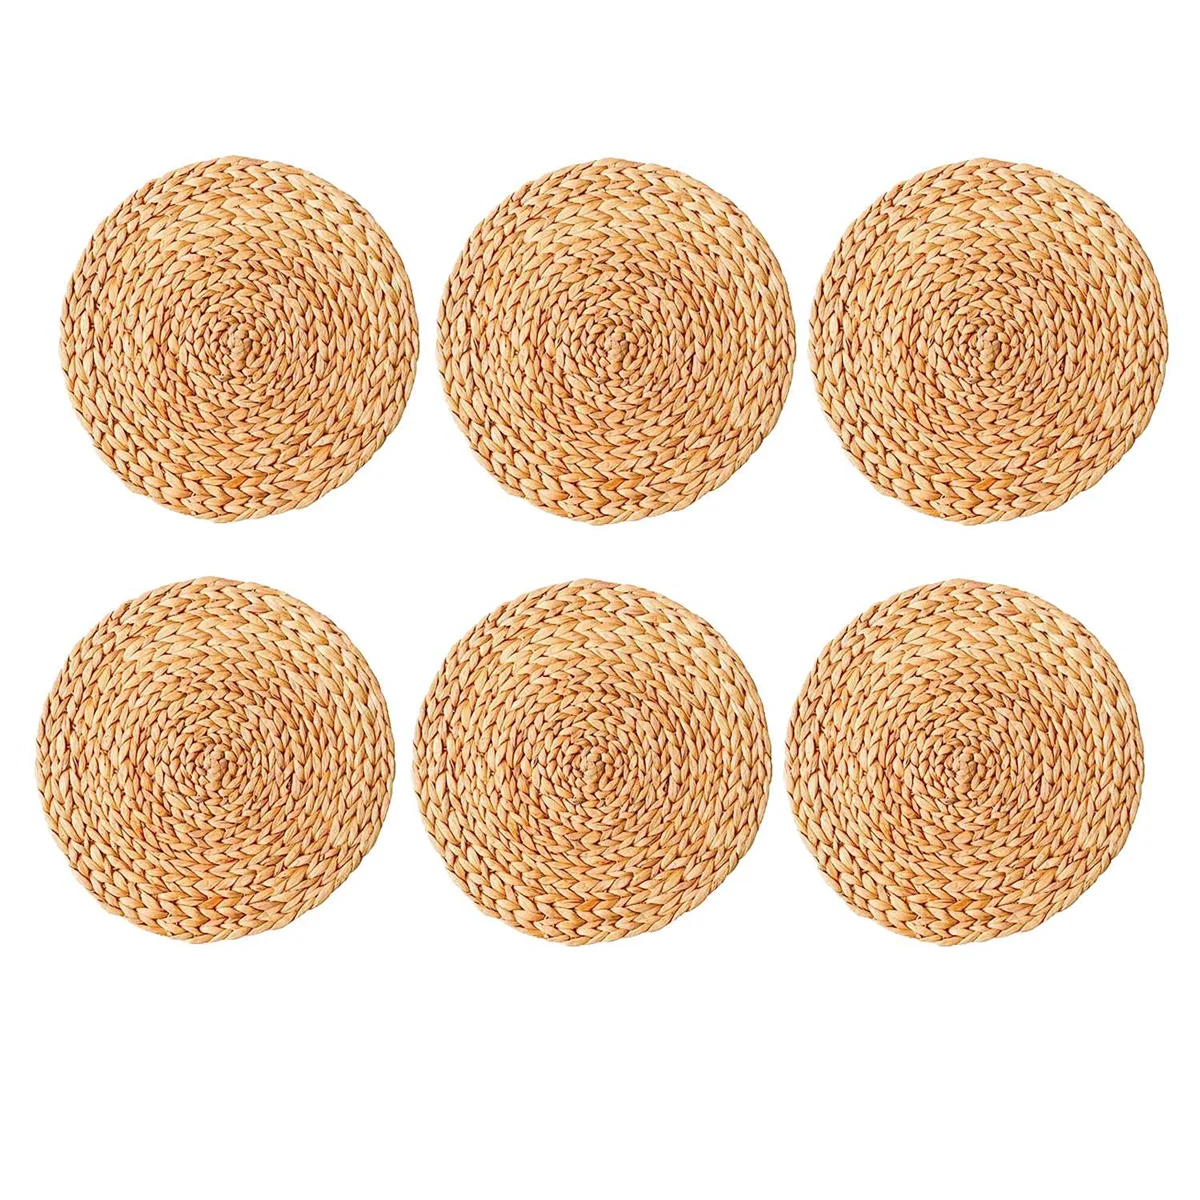 

Round Woven Placemats, Natural Water Hyacinth Placemats, Wicker Placemats, Braided Straw Rattan Table Mats 6Pack